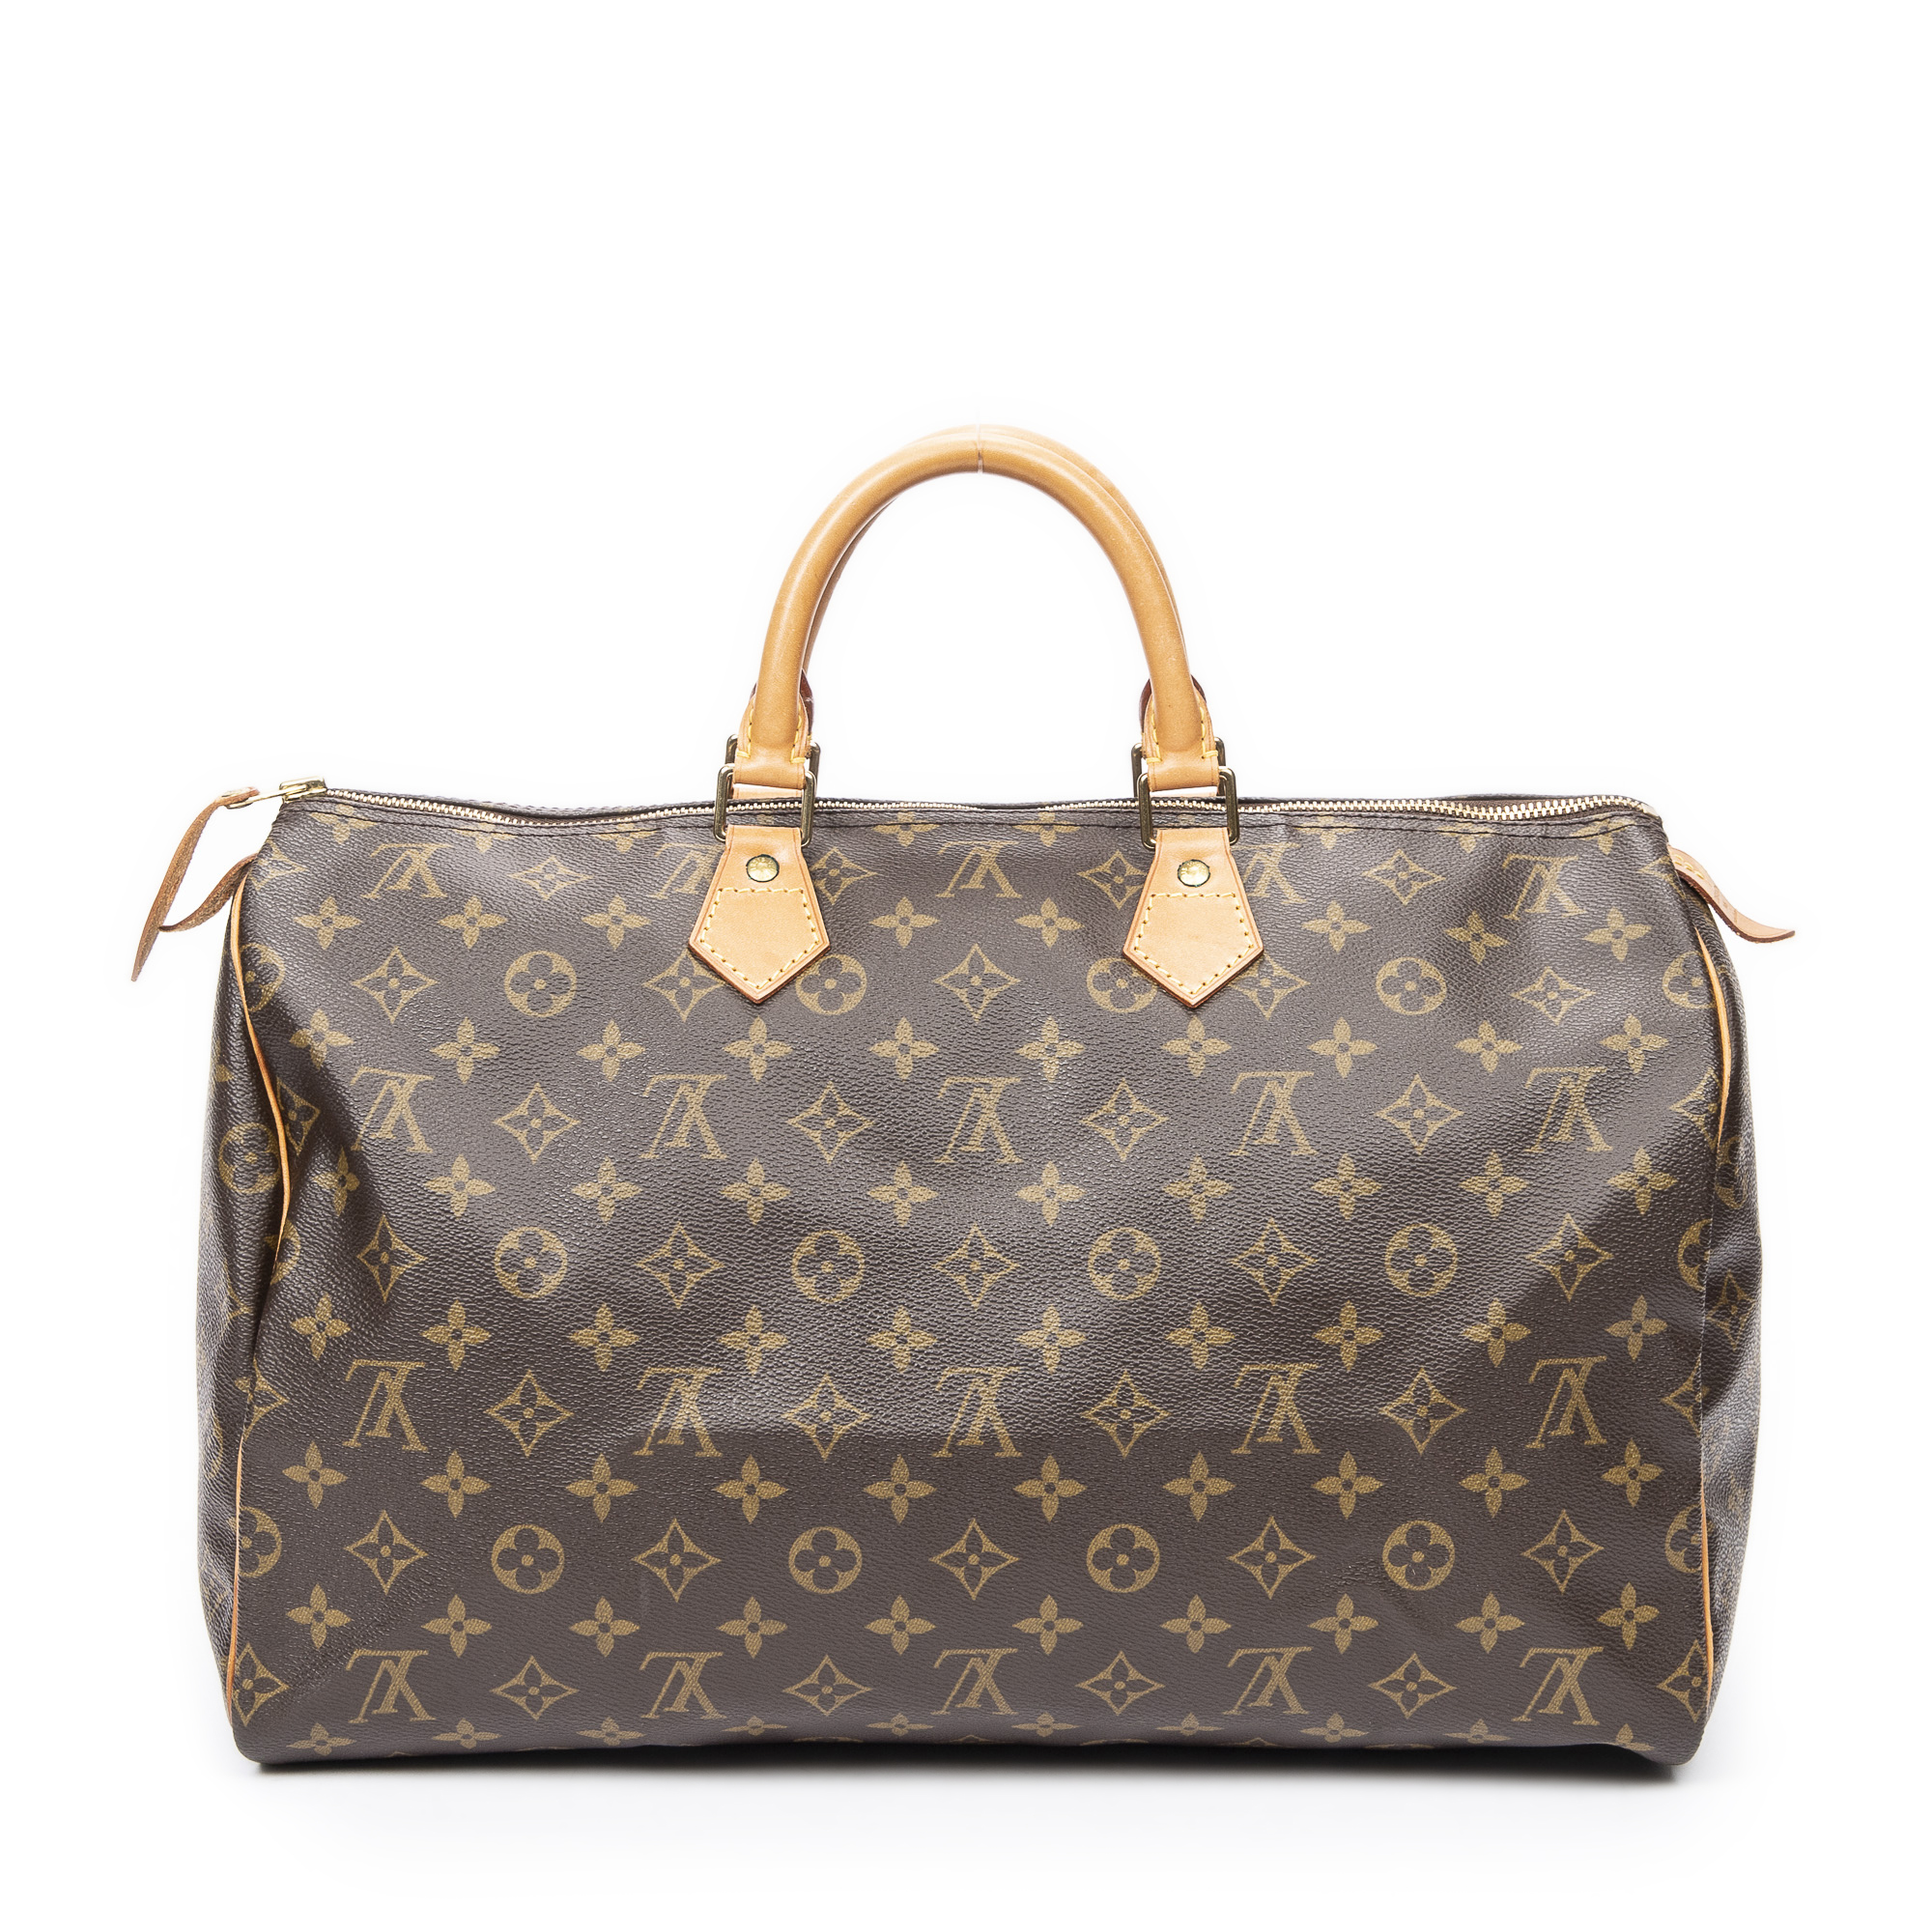 Louis Vuitton 40 speedy bag certified & Authentic with Certification